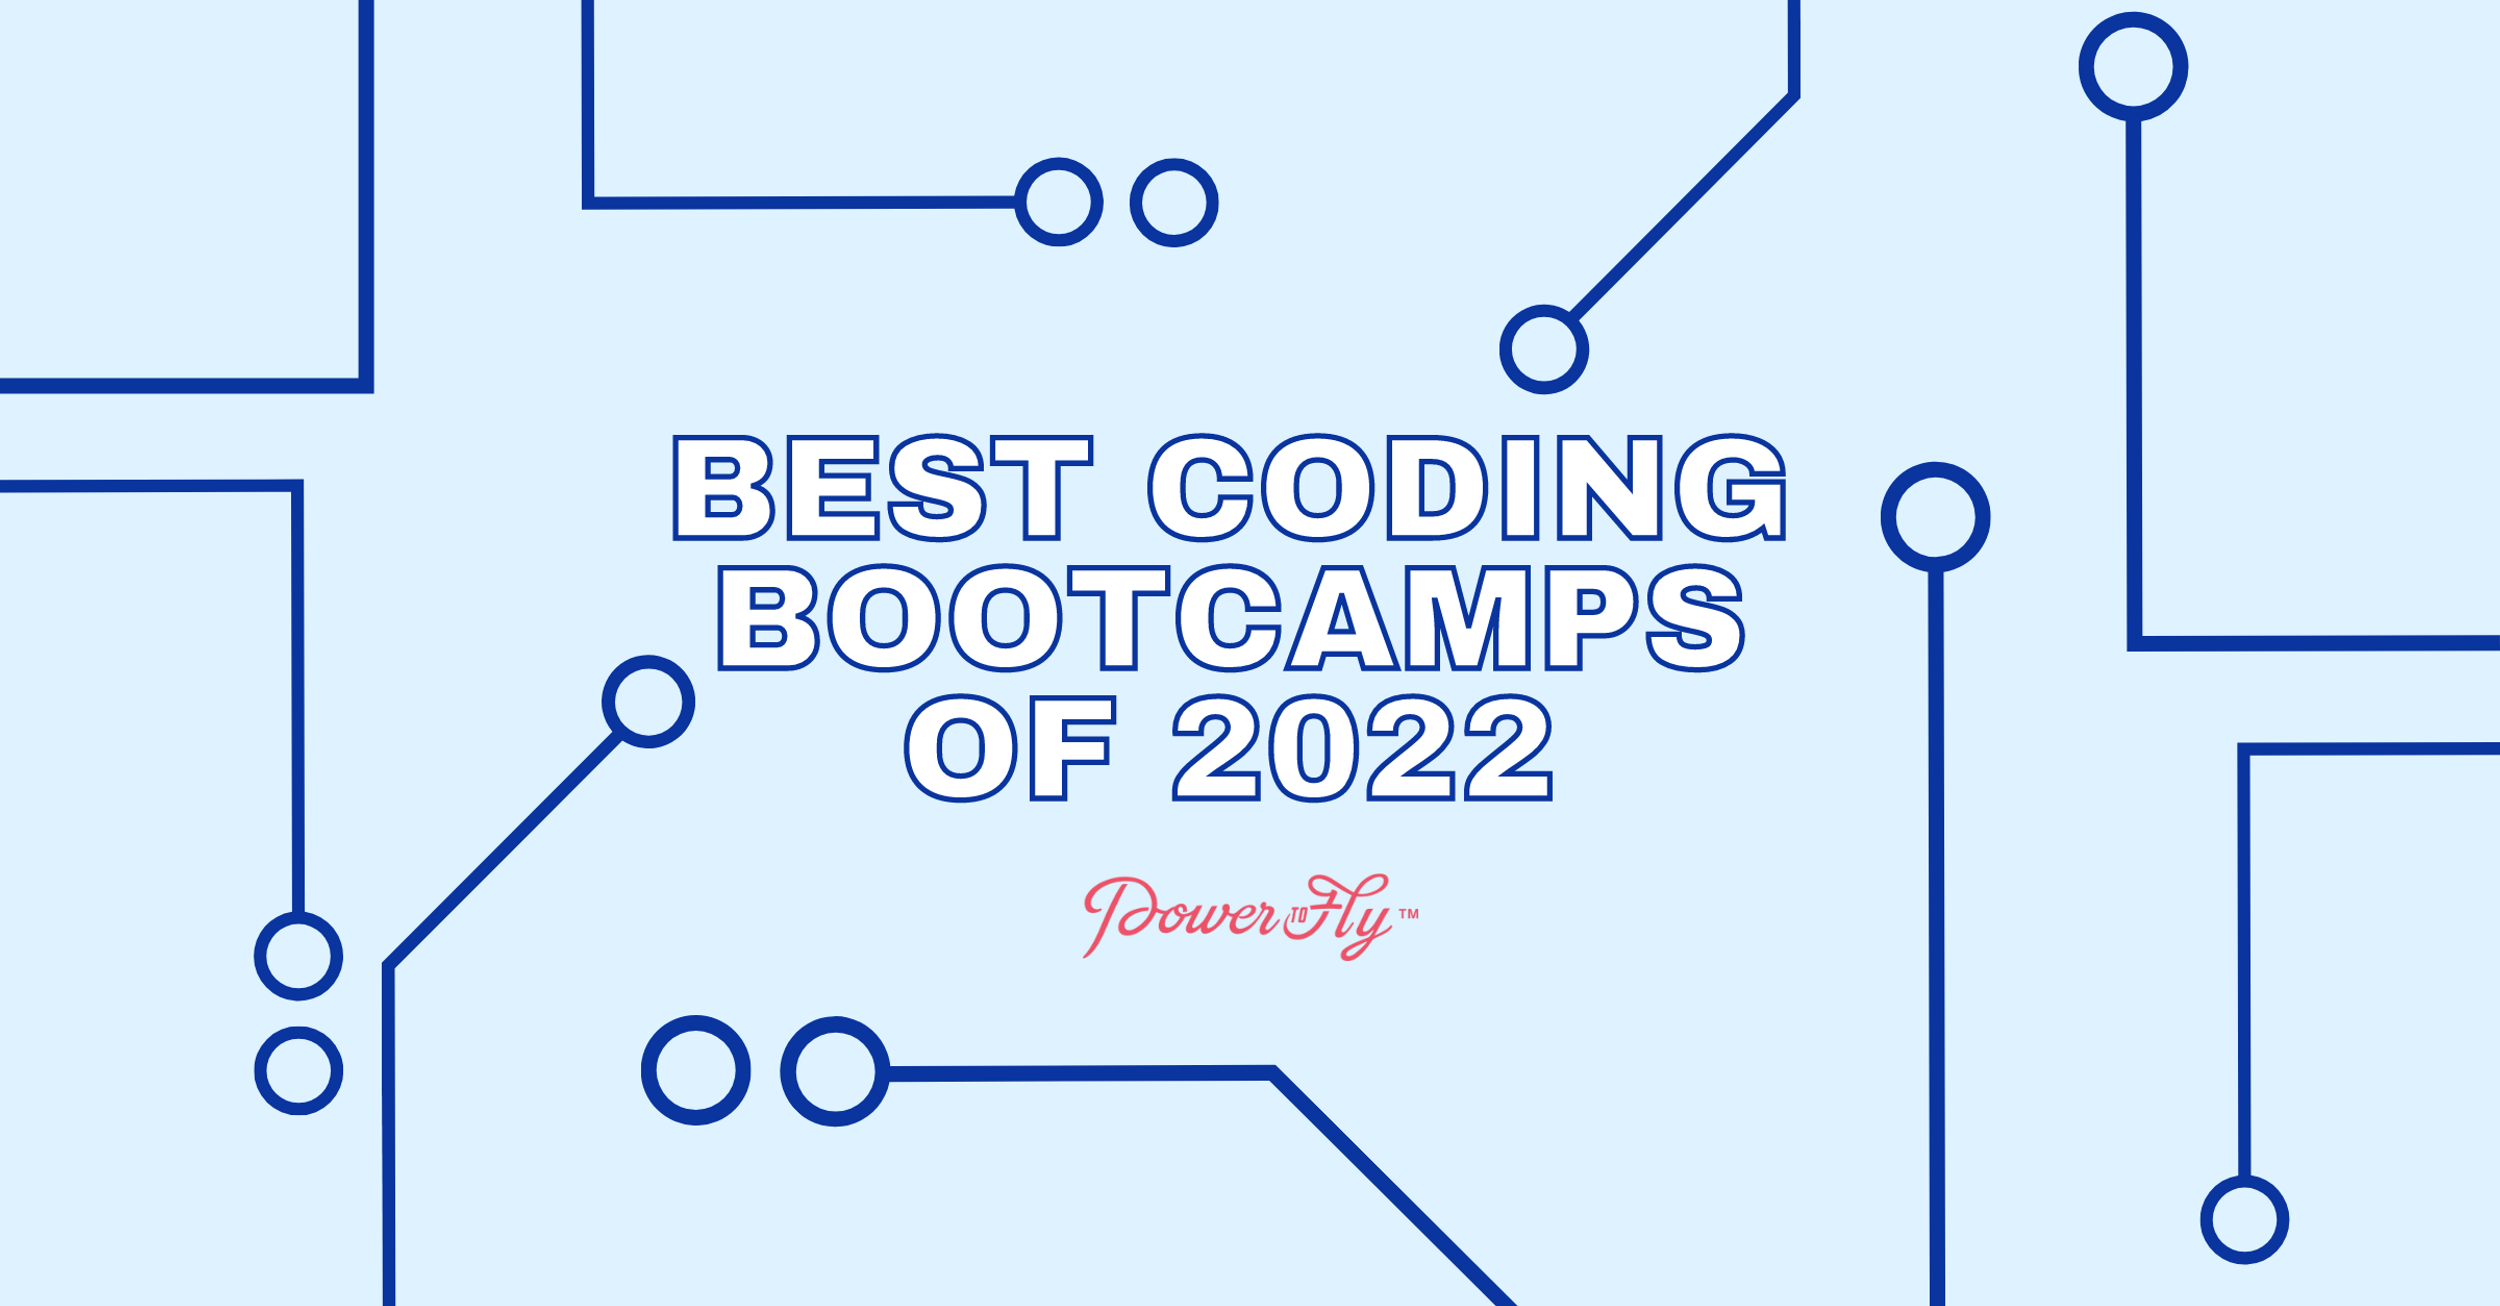 Best Coding Bootcamps of 2022